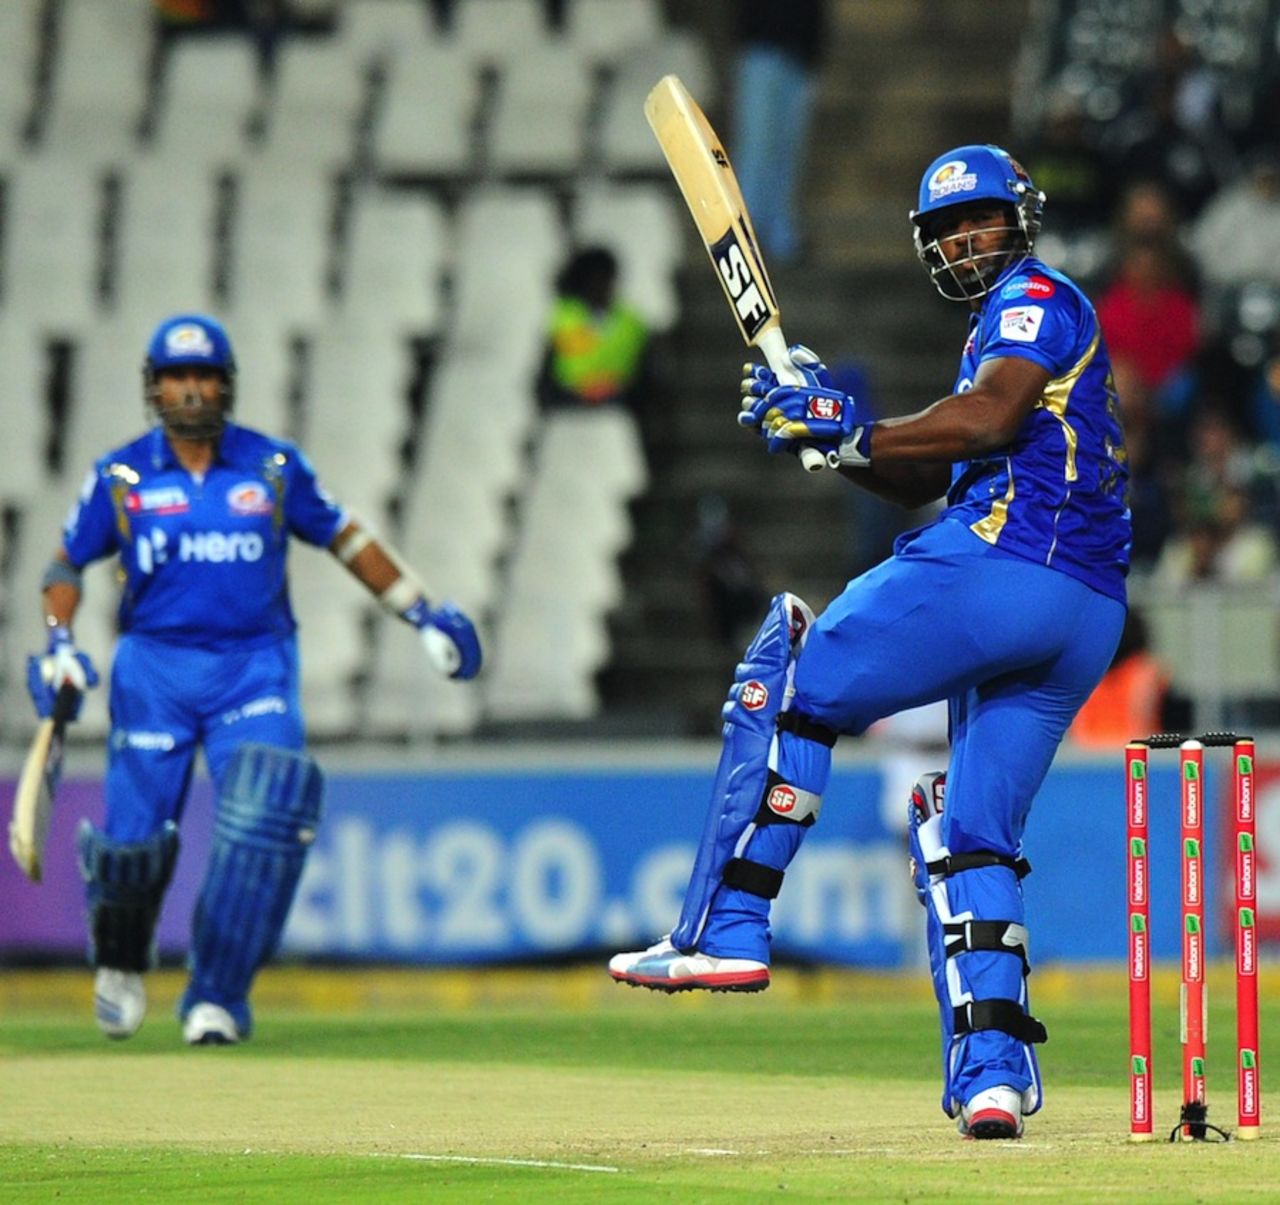 Dwayne Smith swivels to guide the ball on the leg side, Chennai Super Kings v Mumbai Indians, Group B, Champions League T20, October 20, 2012 